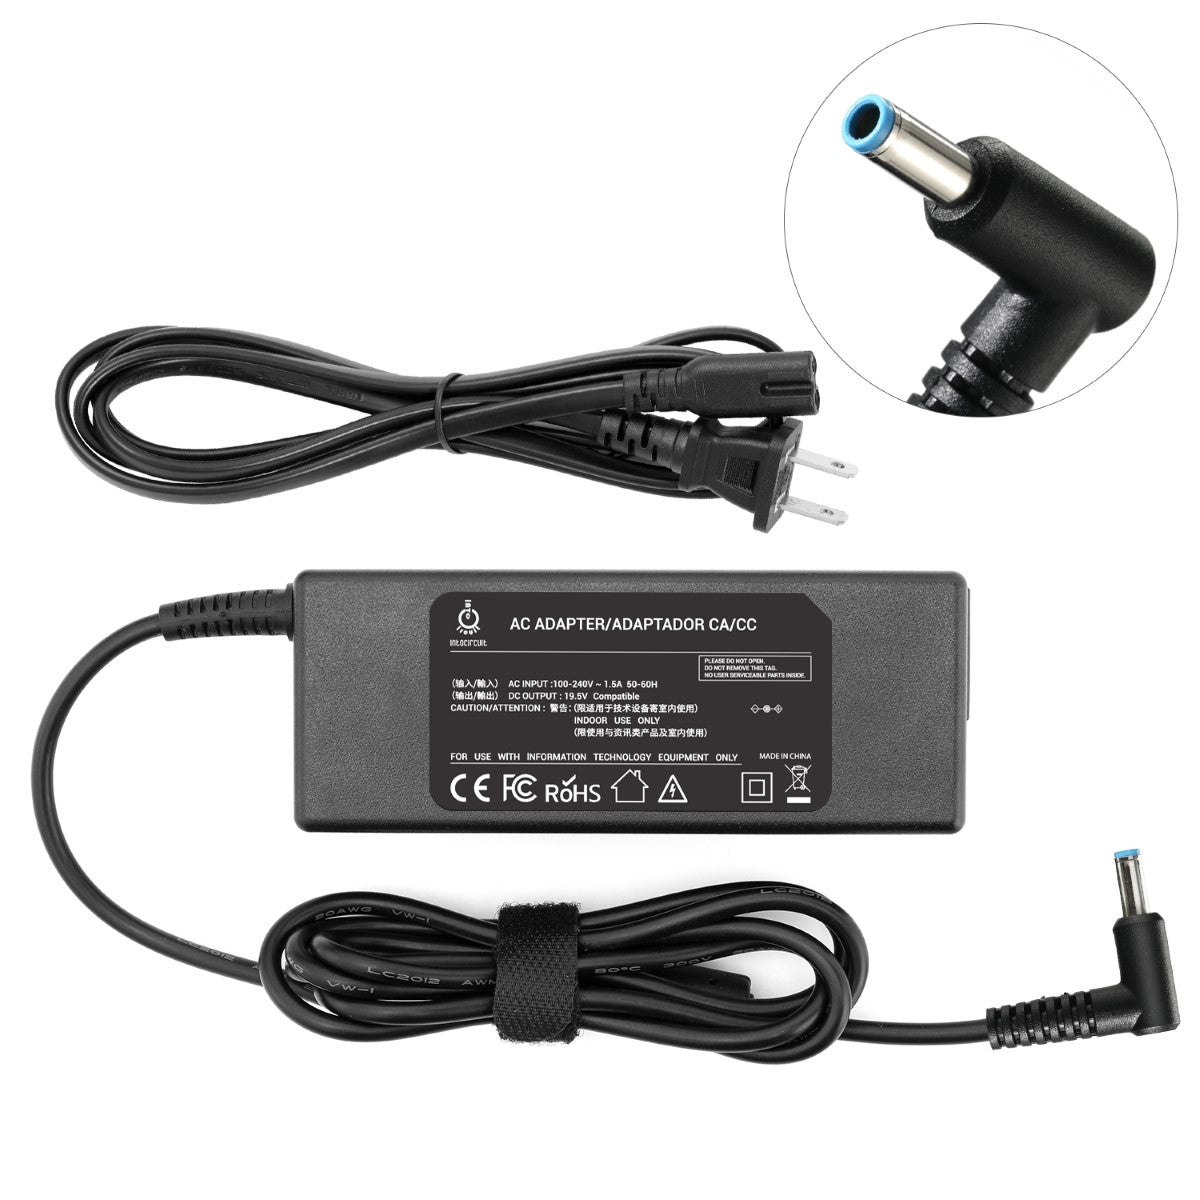 Charger for HP 15-g011nr Laptop